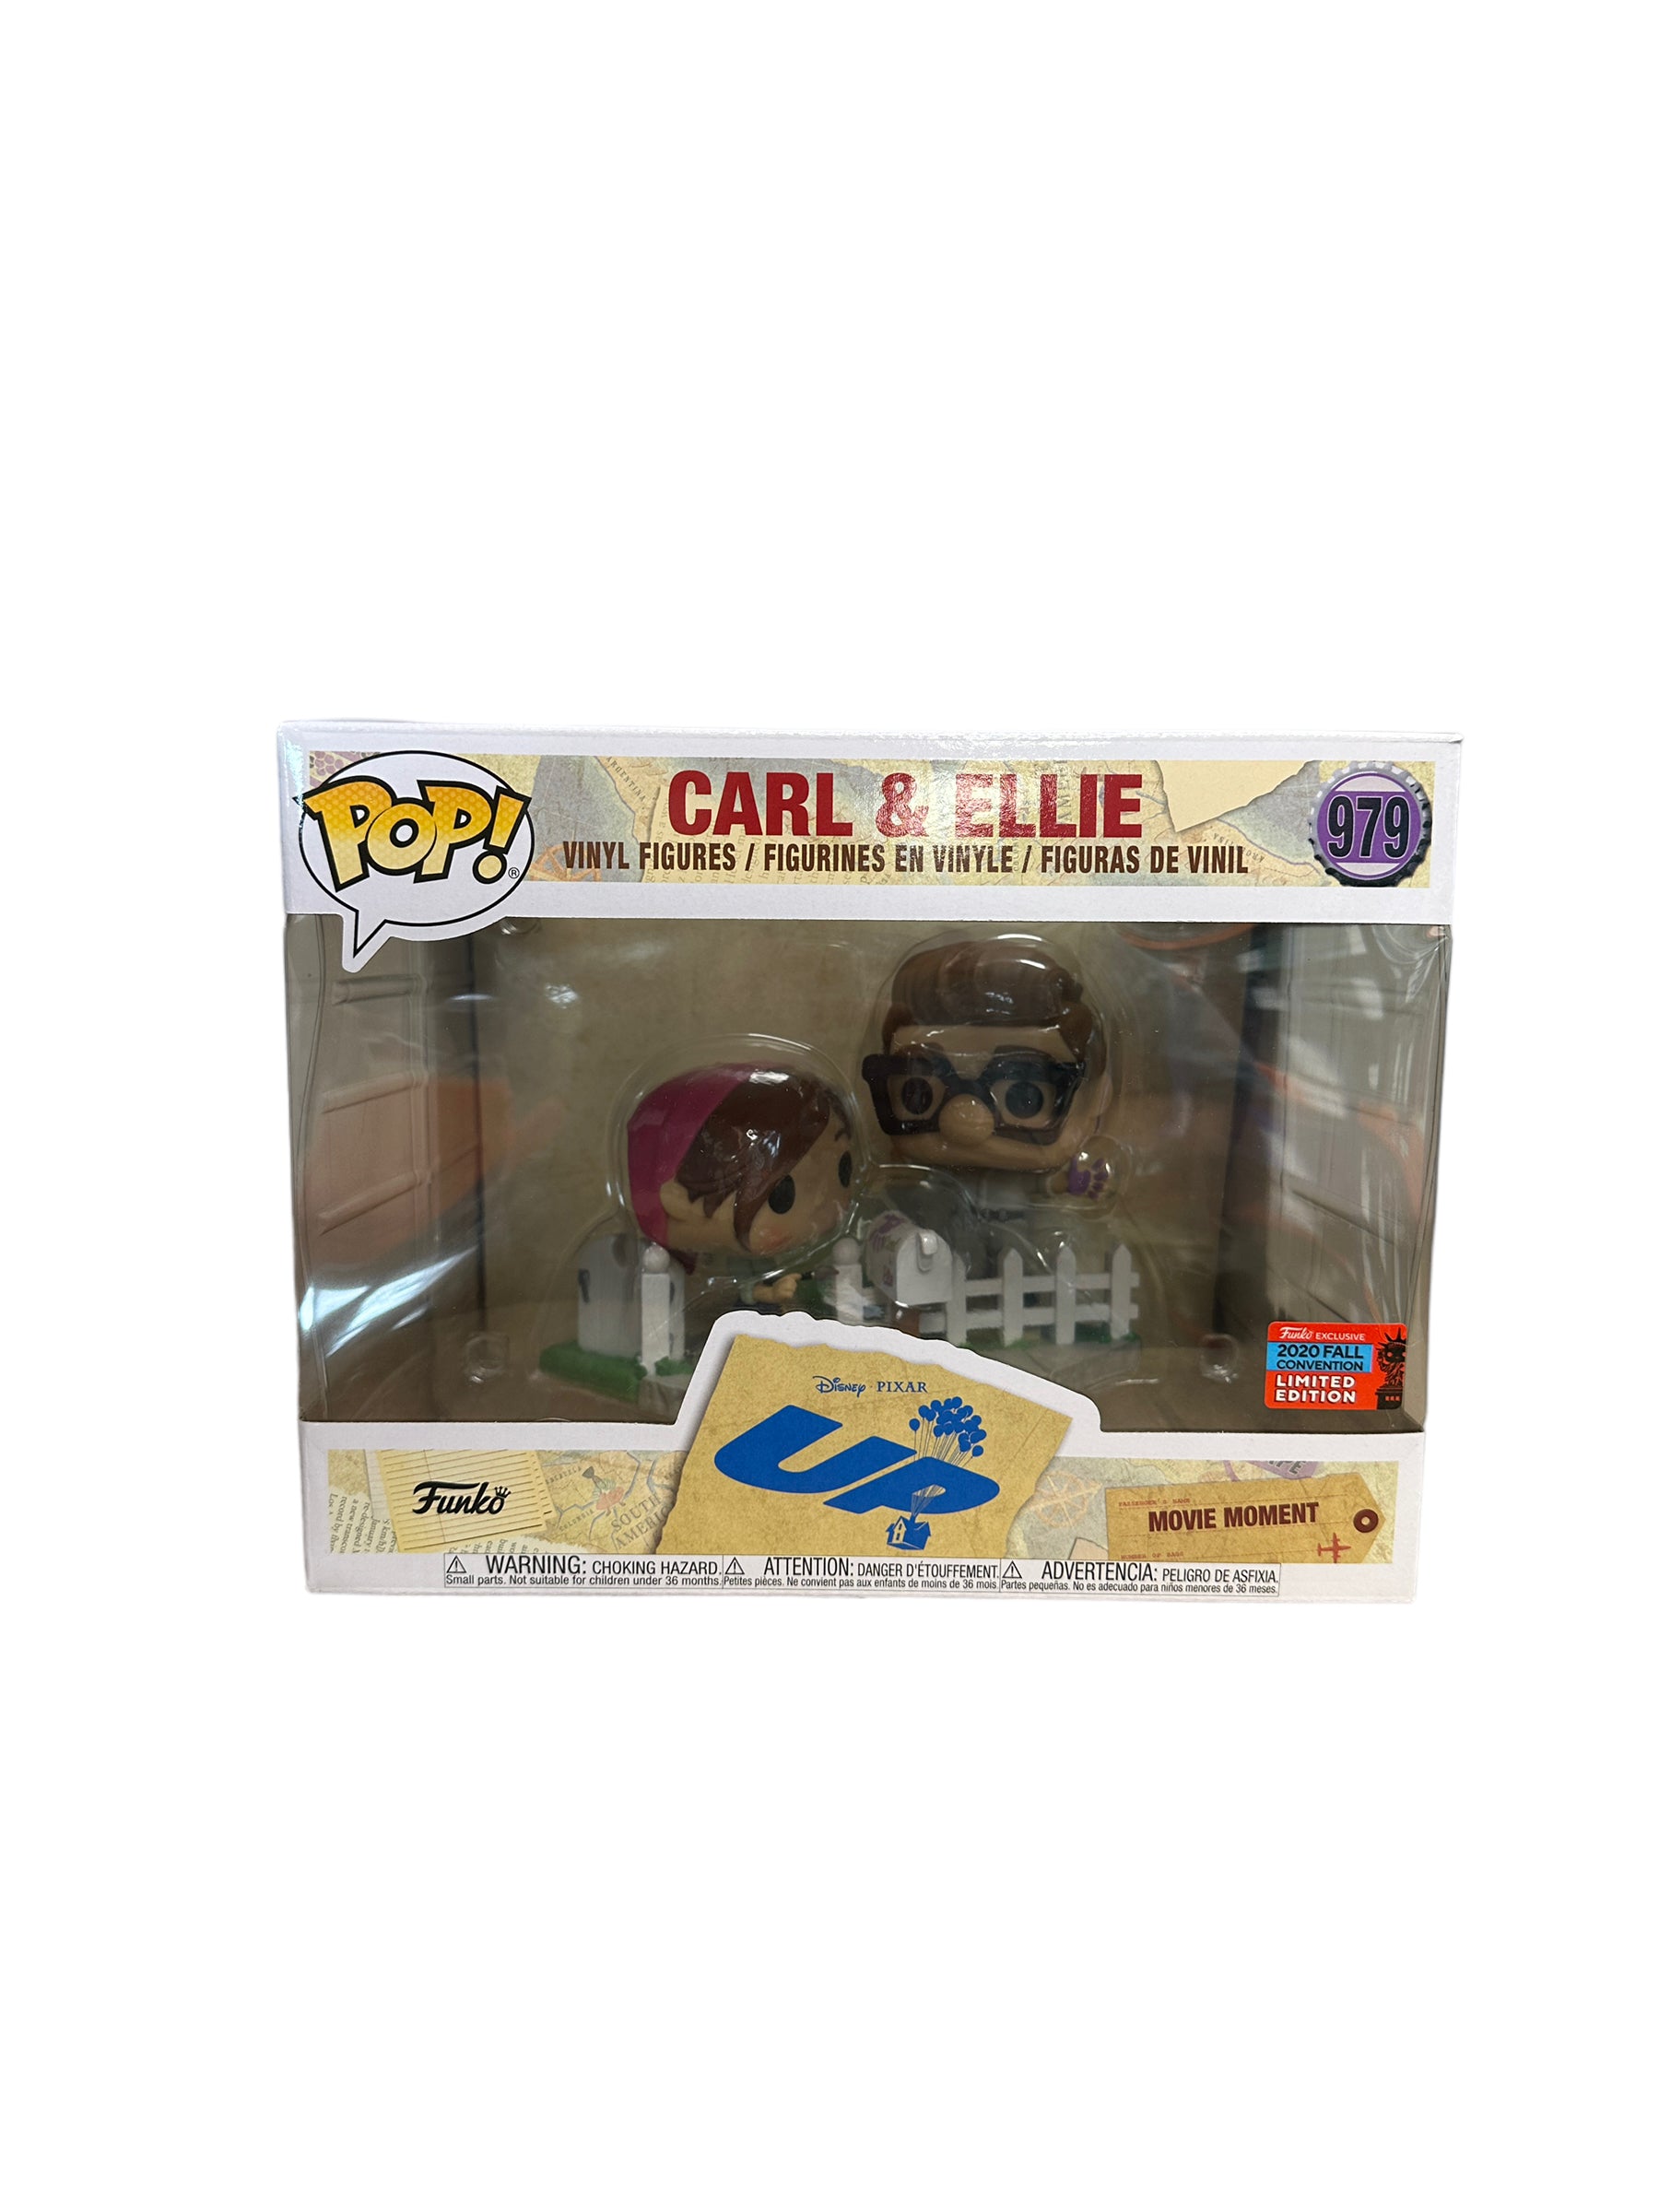 Carl & Ellie #979 (Painting) Deluxe Funko Pop! - Up - NYCC 2020 Shared Exclusive - Condition 8.5/10